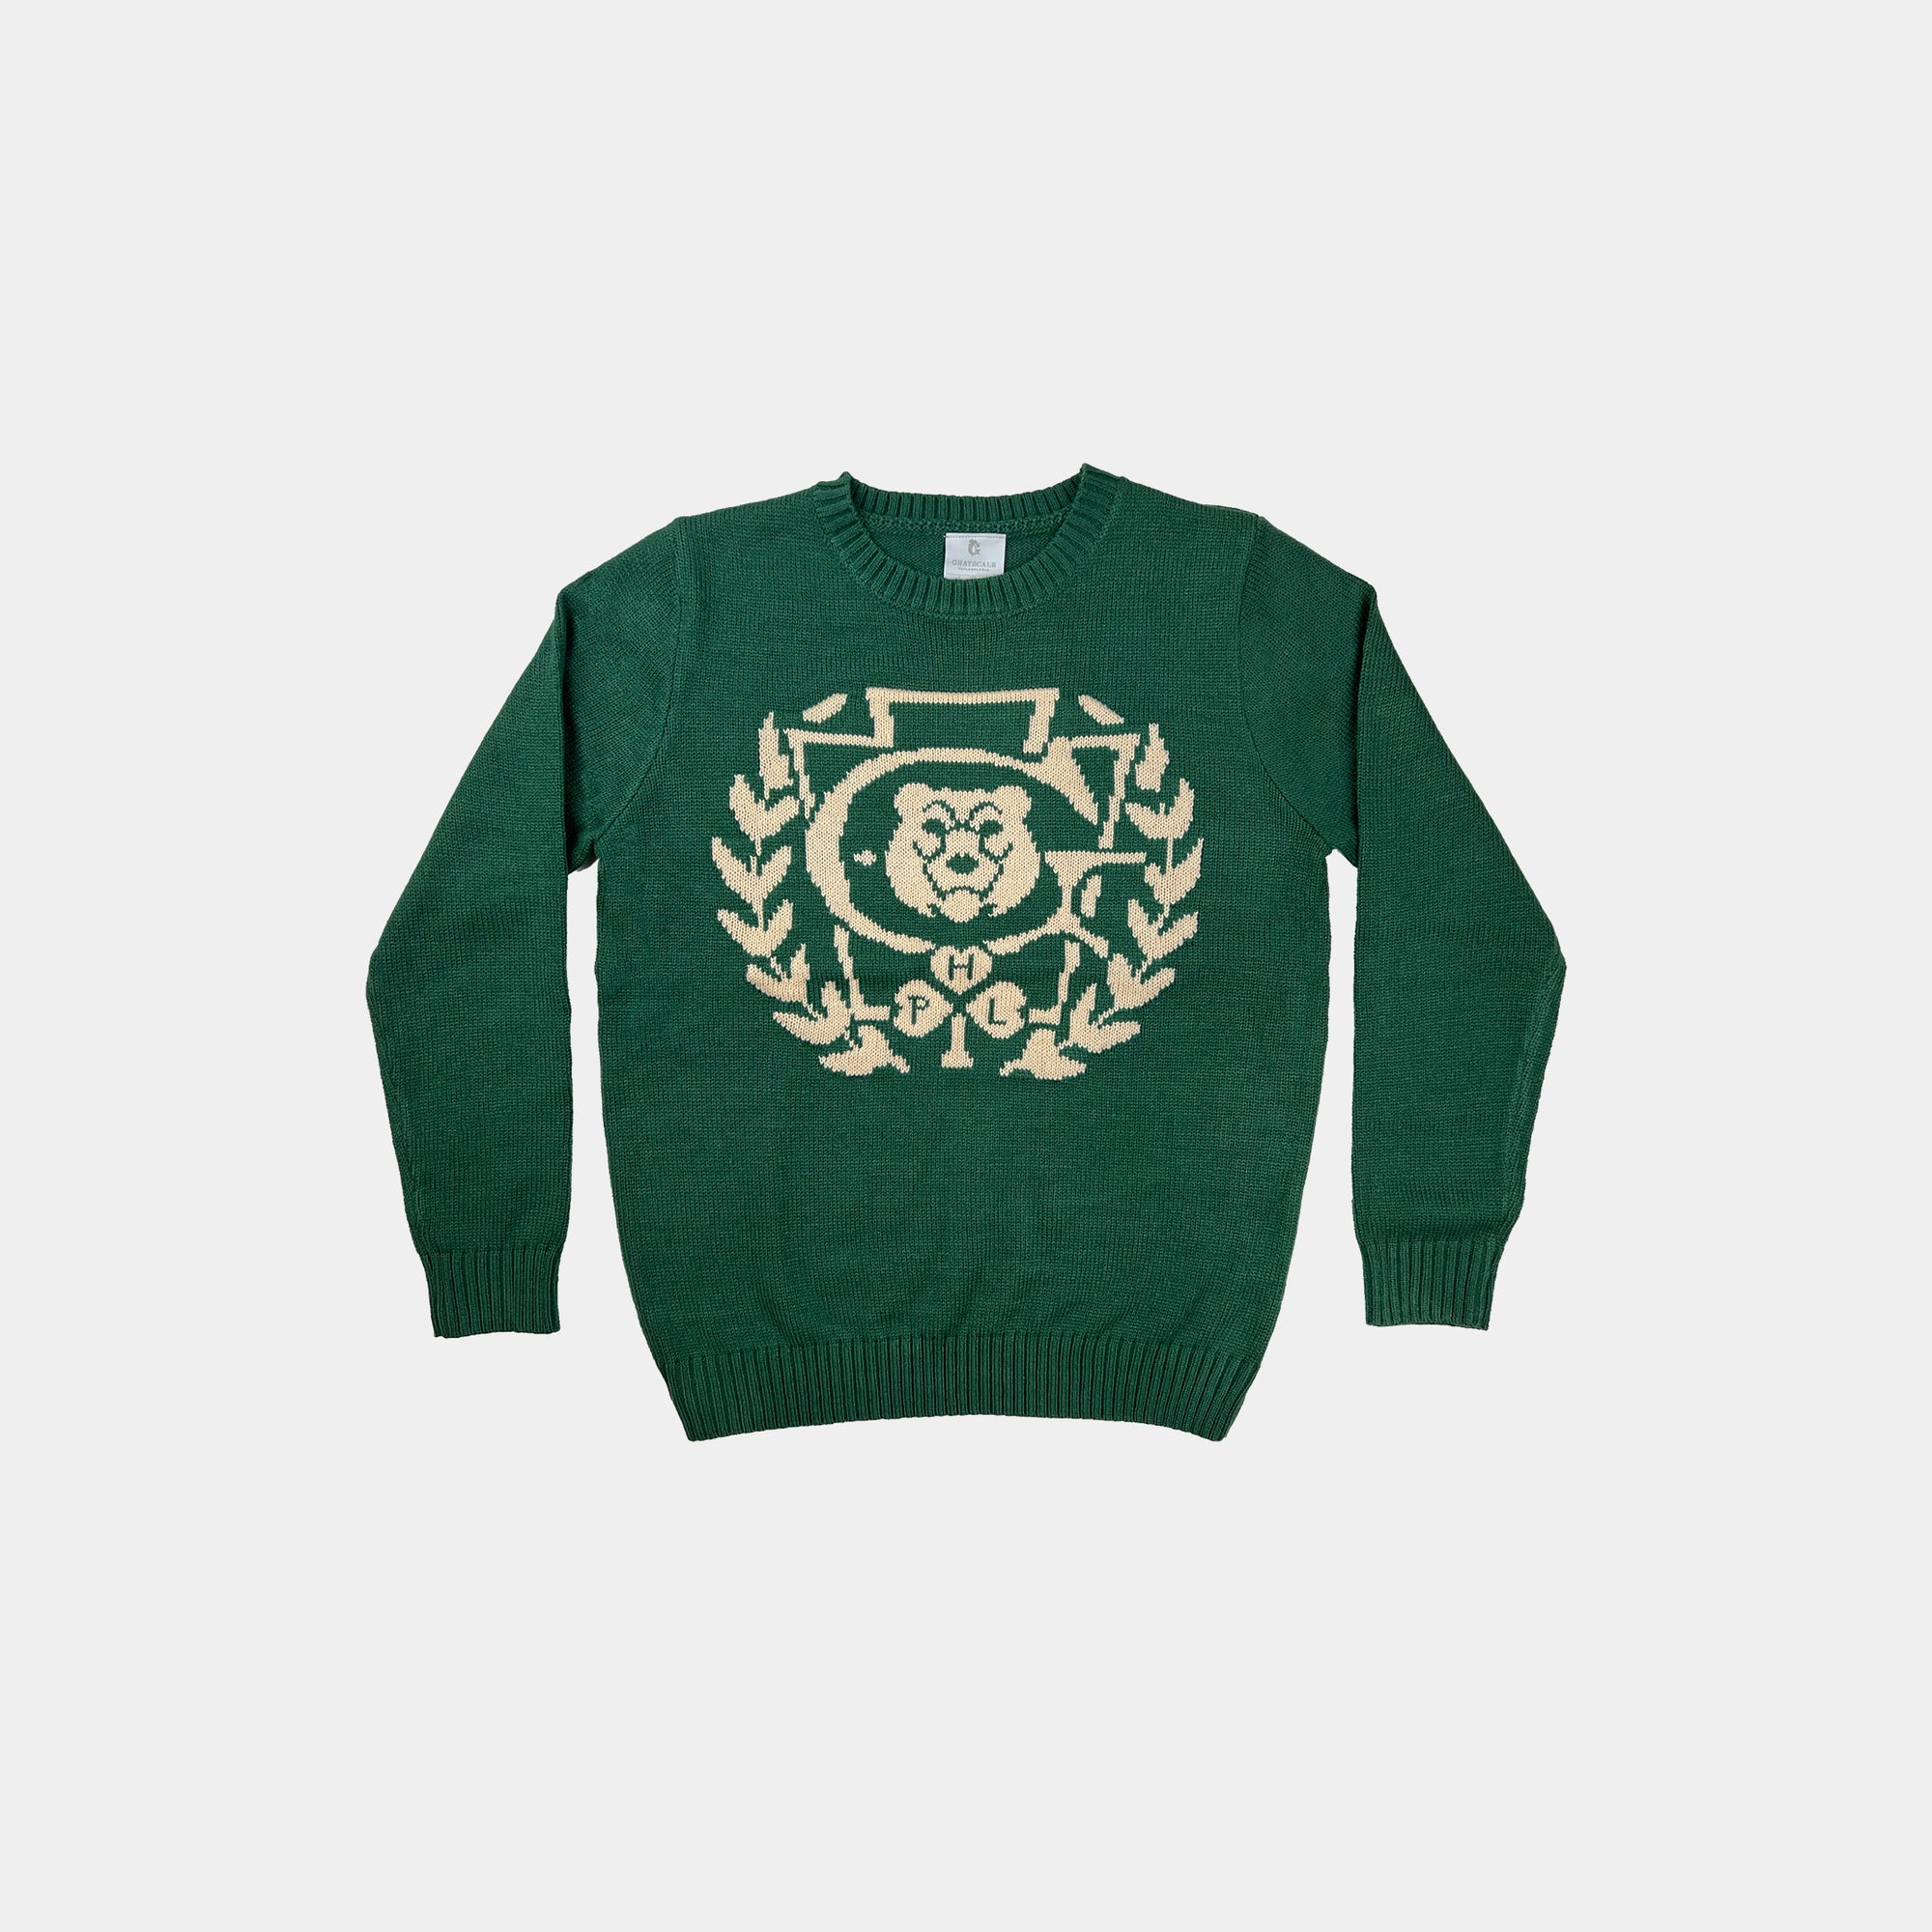 2023 Crest Knitted Sweater